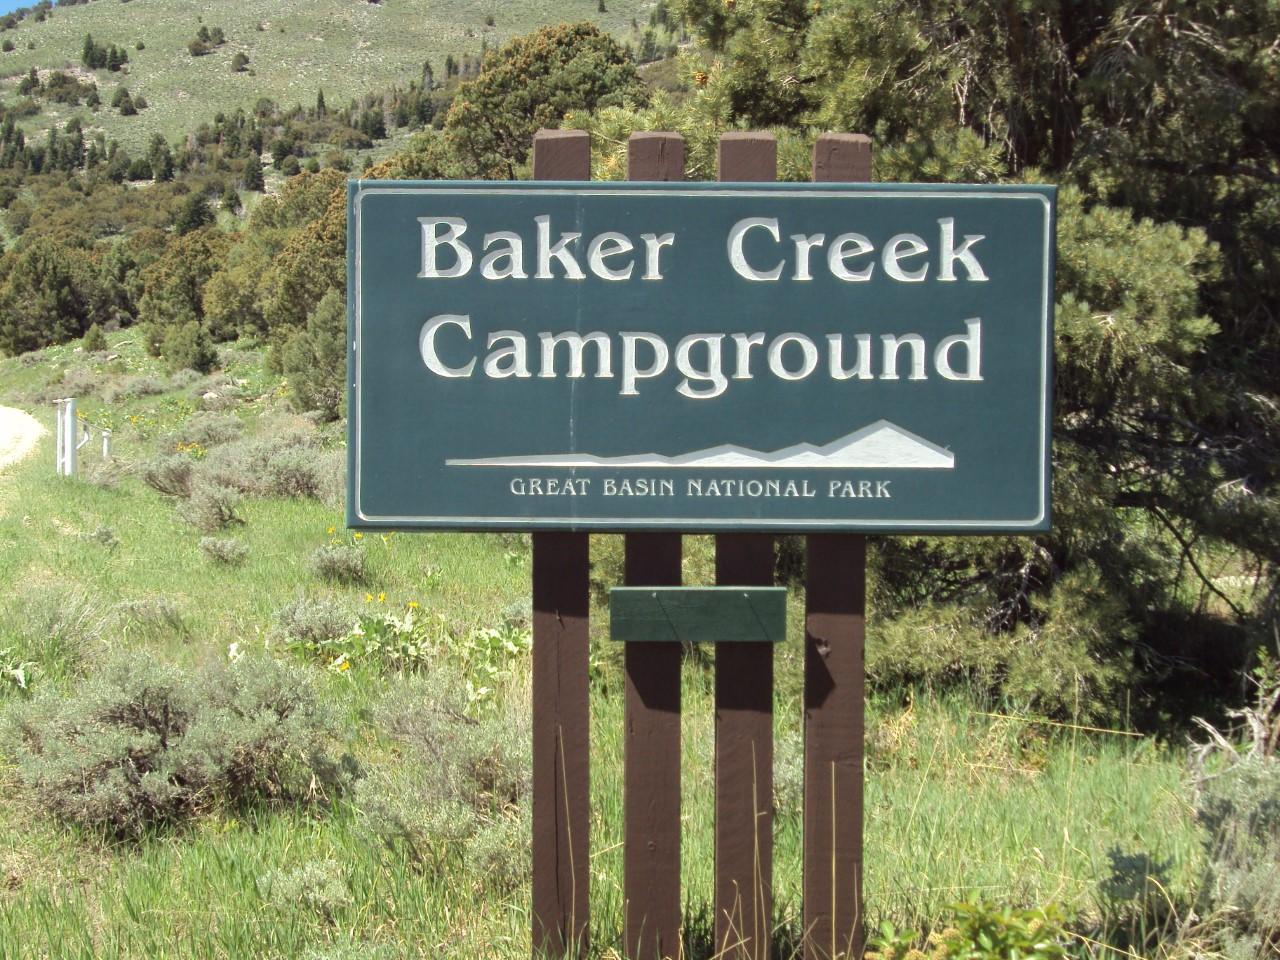 Green sign with white text "Baker Creek Campground"